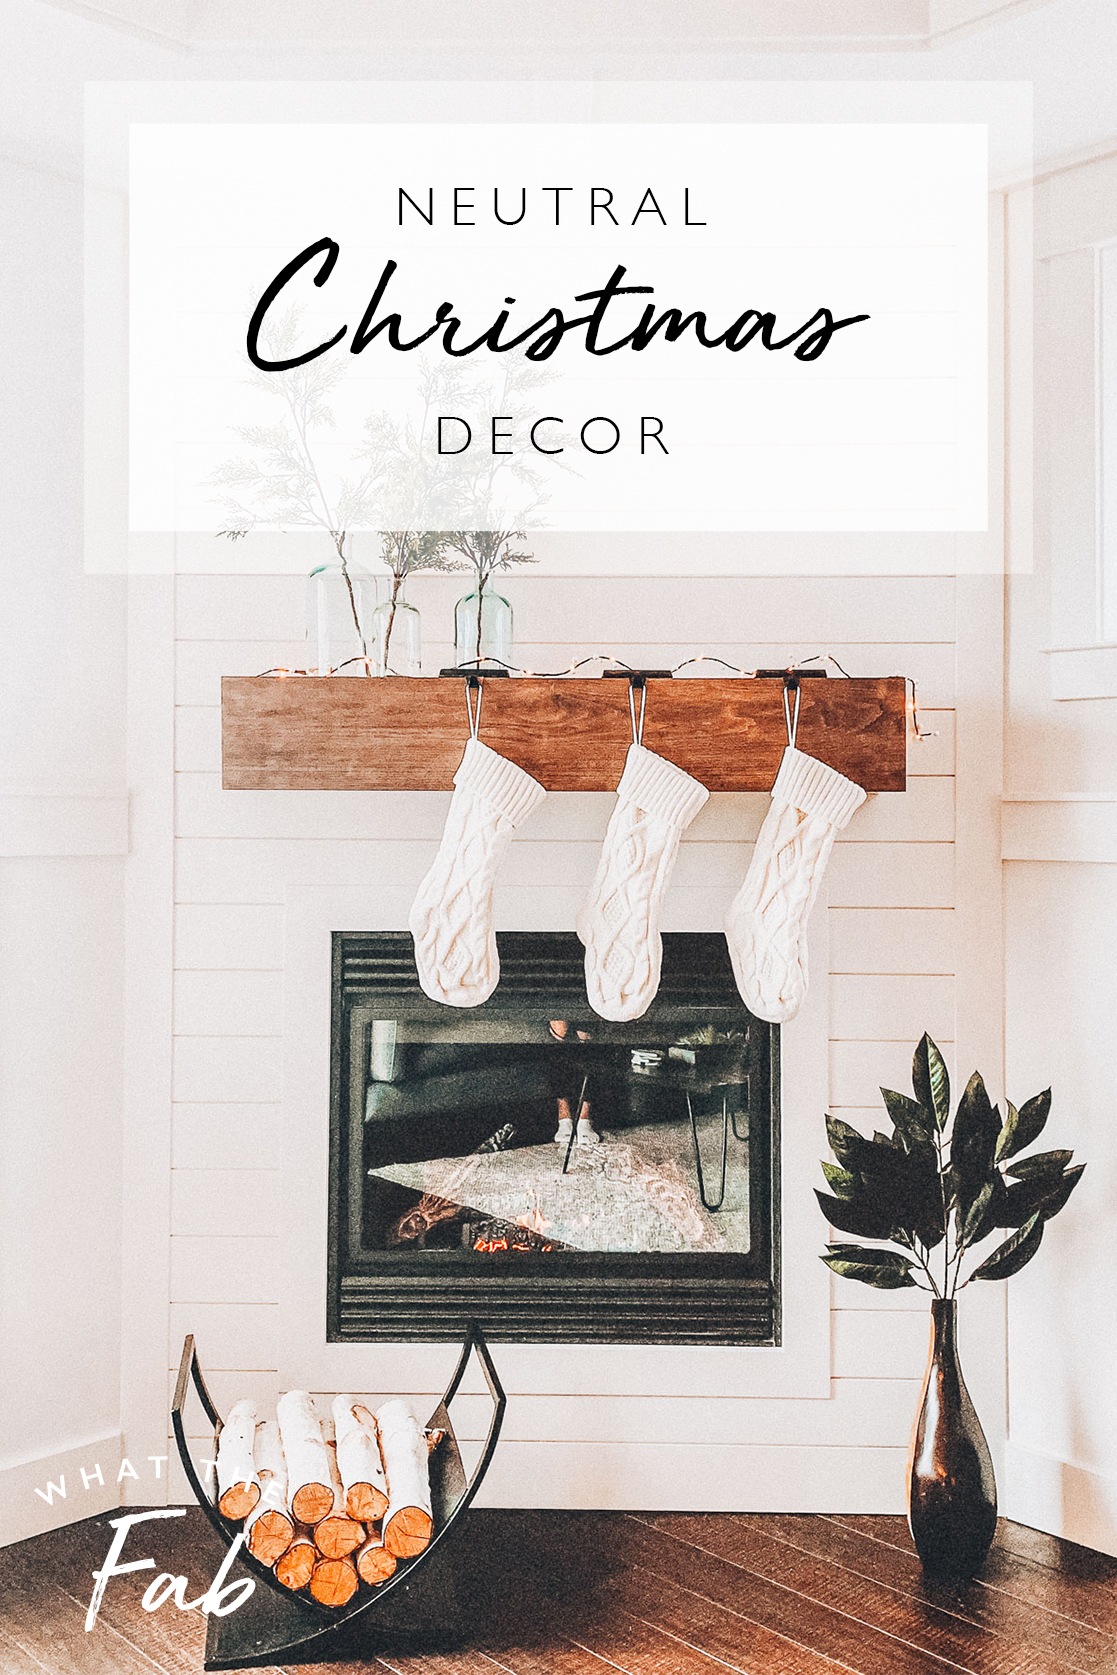 Neutral Christmas decor, by lifestyle blogger What The Fab